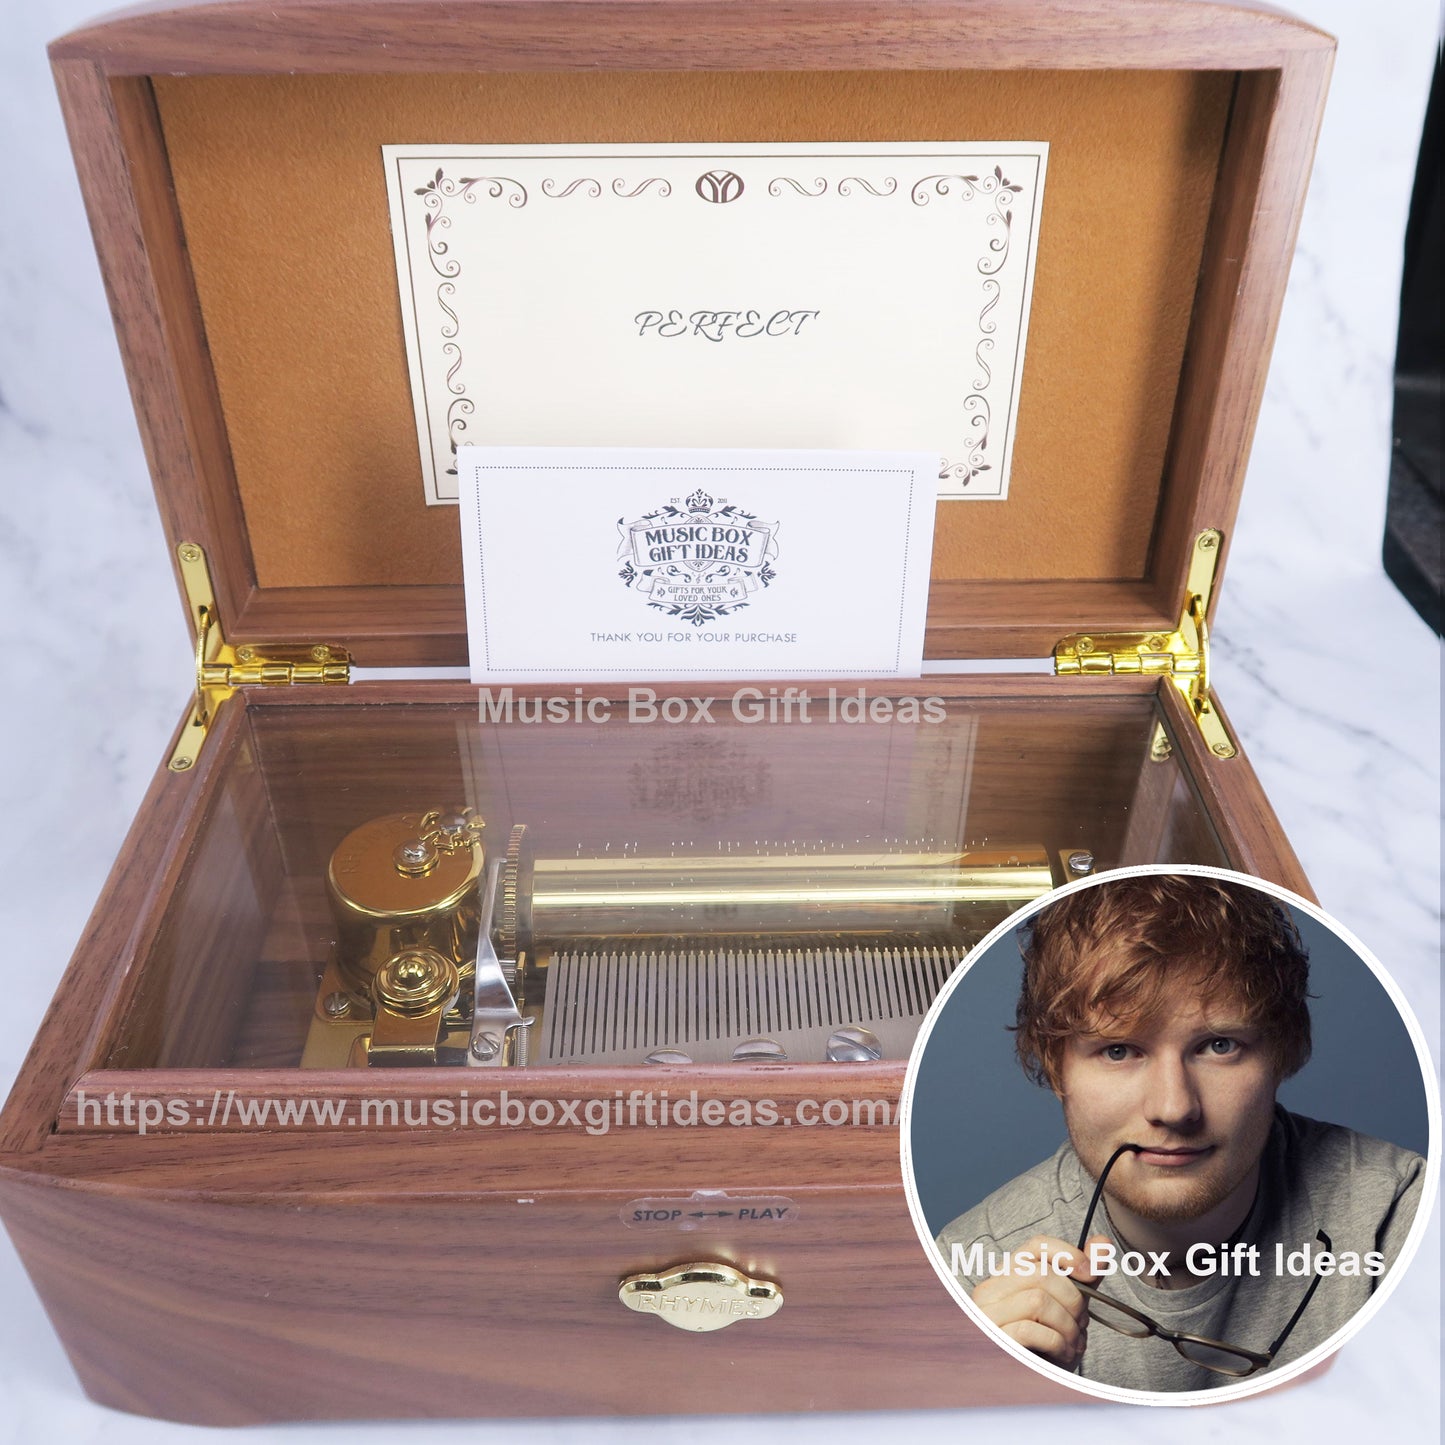 Ed Sheeran Perfect 50-Note Wind-Up Music Box Gift (Wooden) - Music Box Gift Ideas